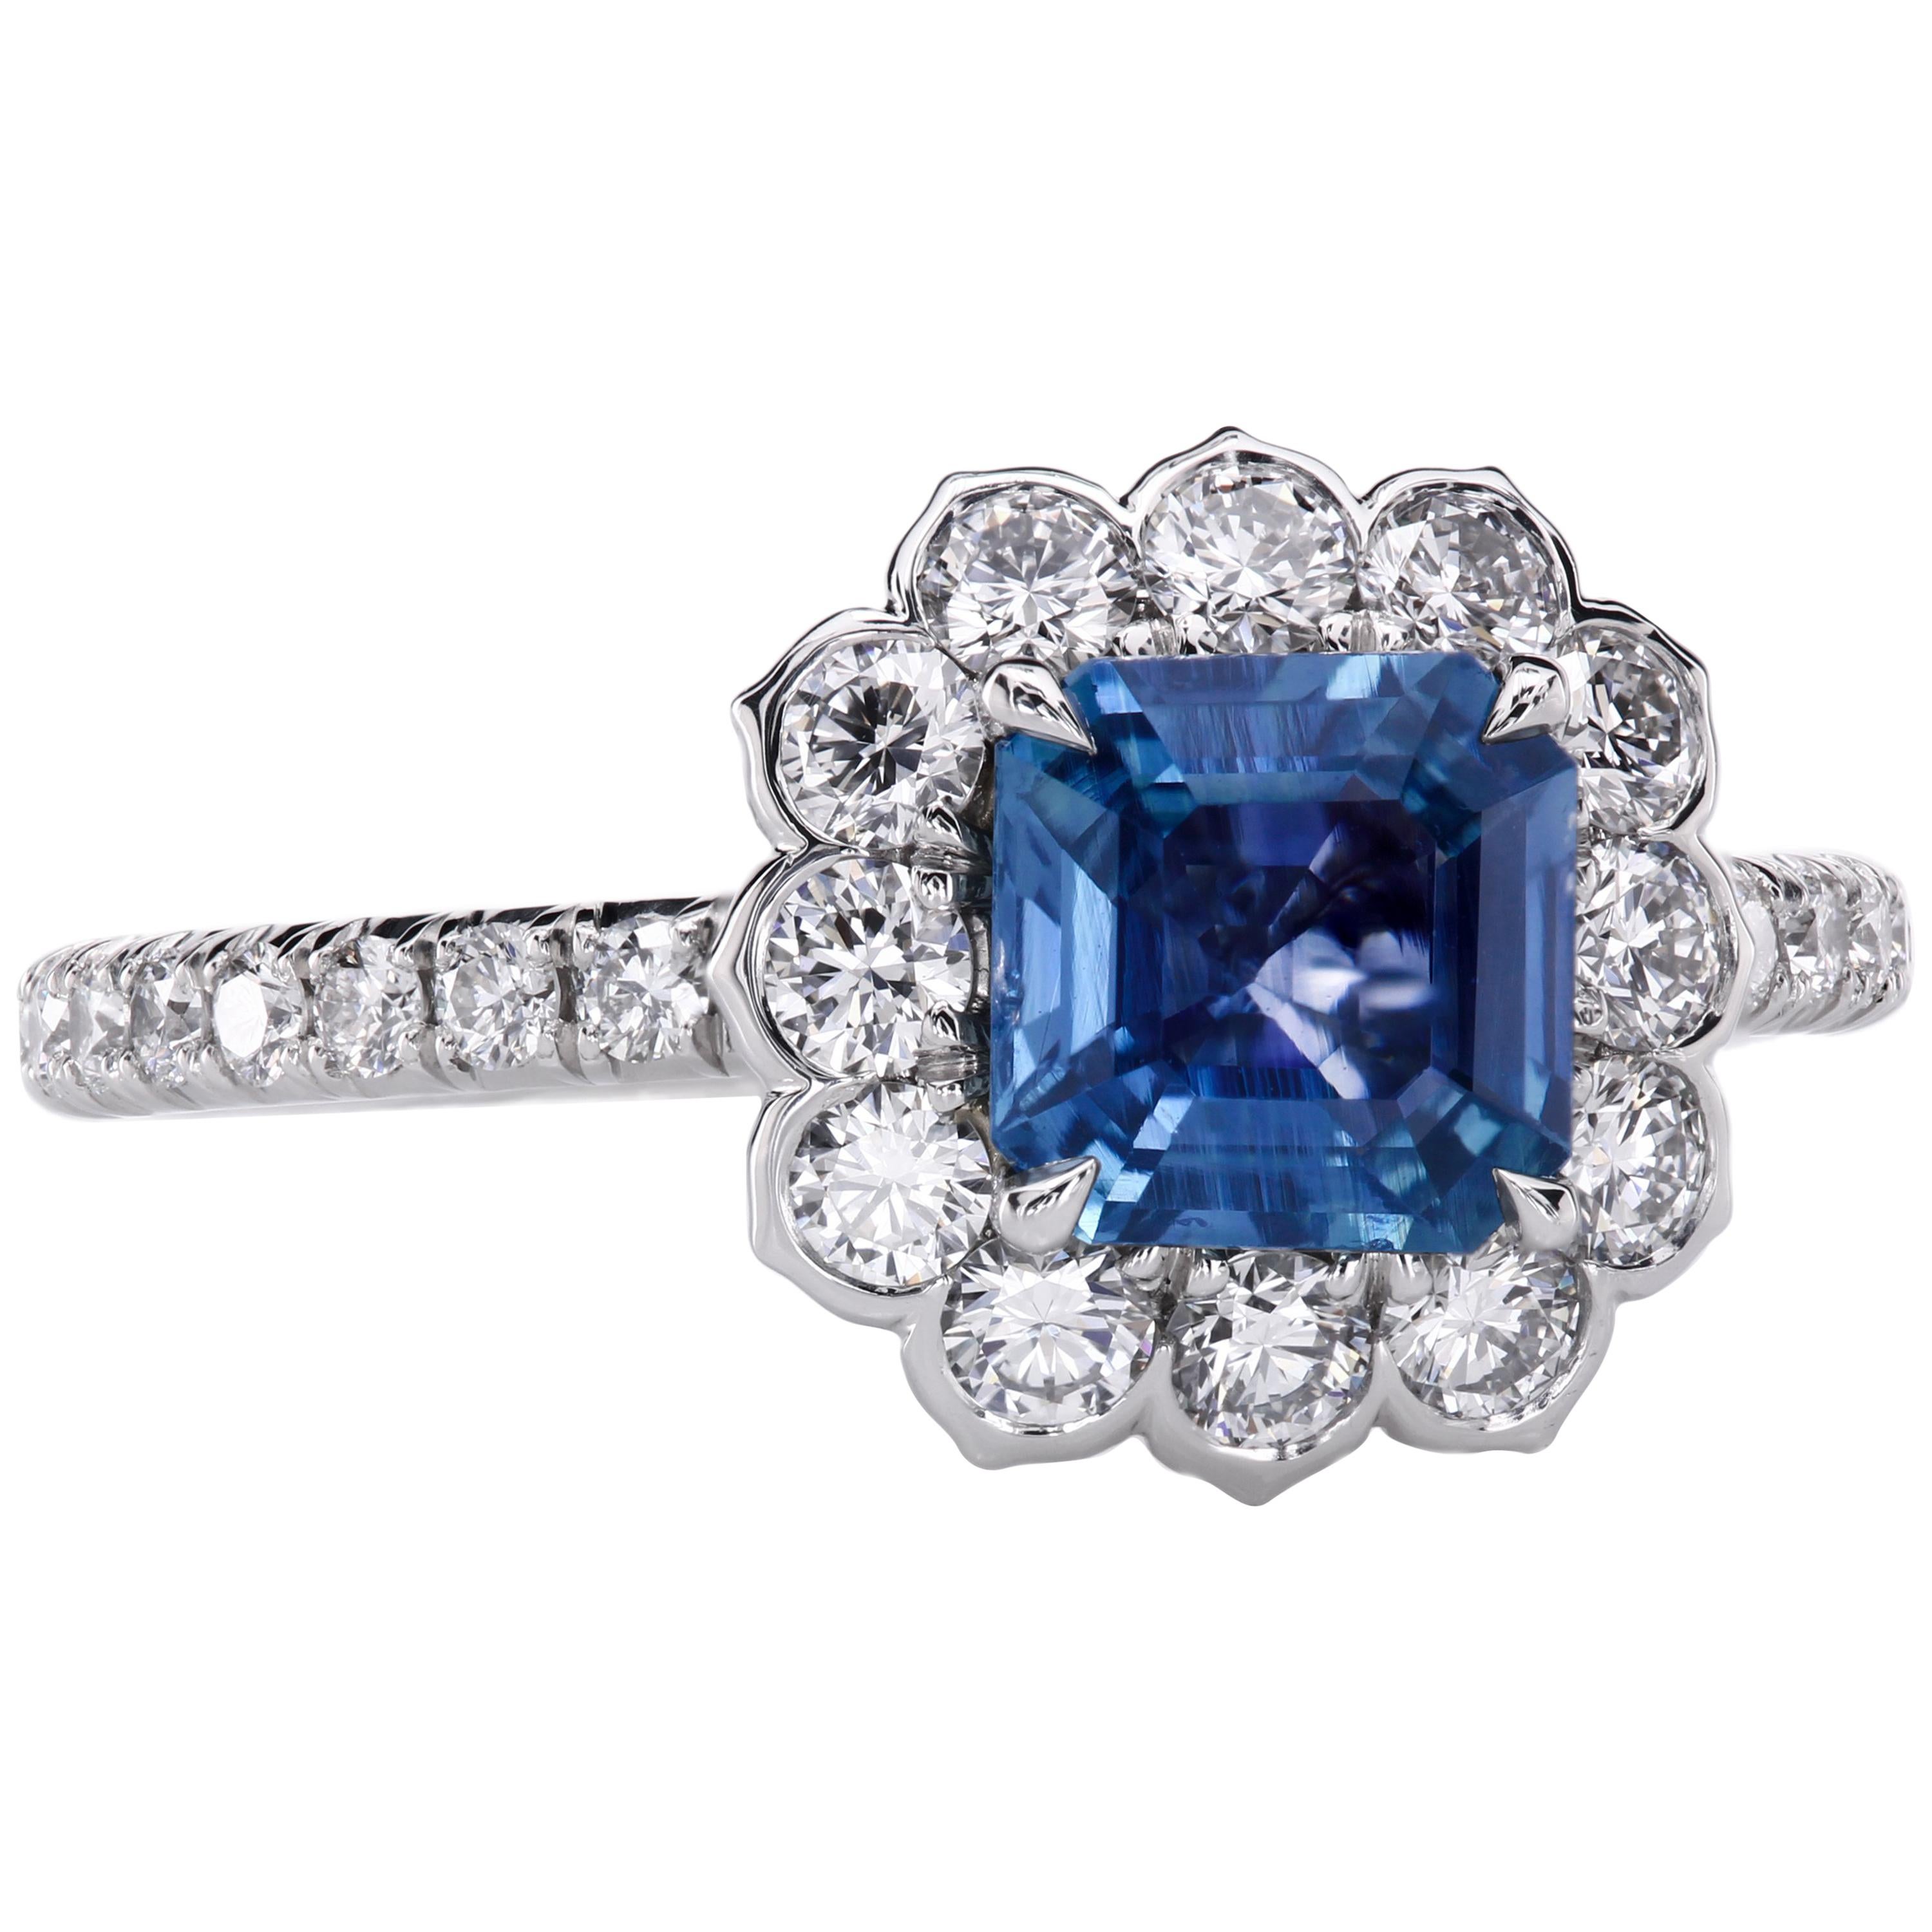 Leon Mege Lotus Halo Engagement Ring with Blue Sapphire and Diamond Micro Pave For Sale